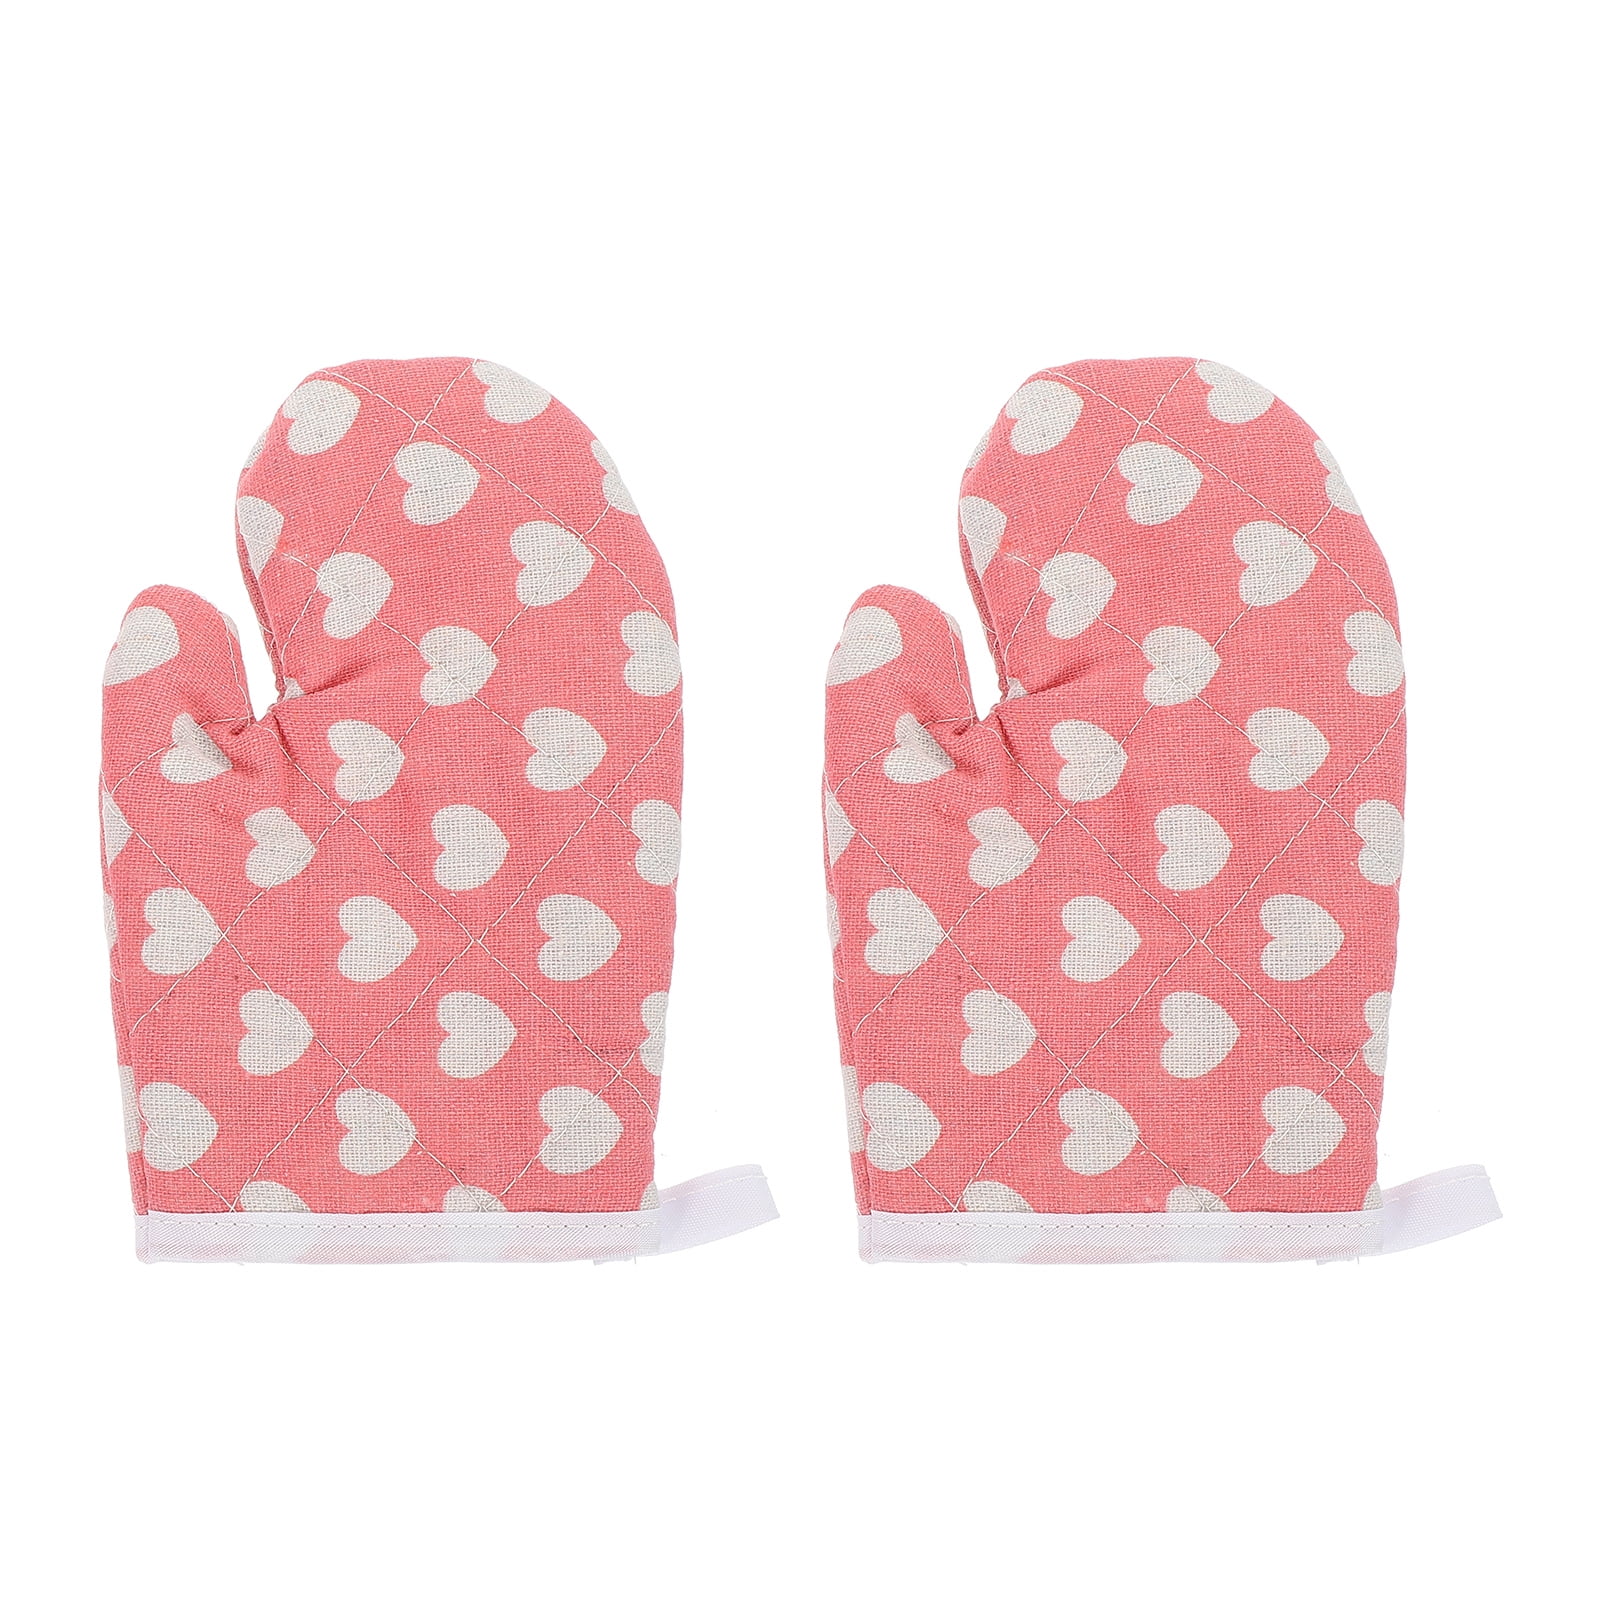 DOITOOL 2Pcs Kids Oven Mitts for Children Play Kitchen, Microwave